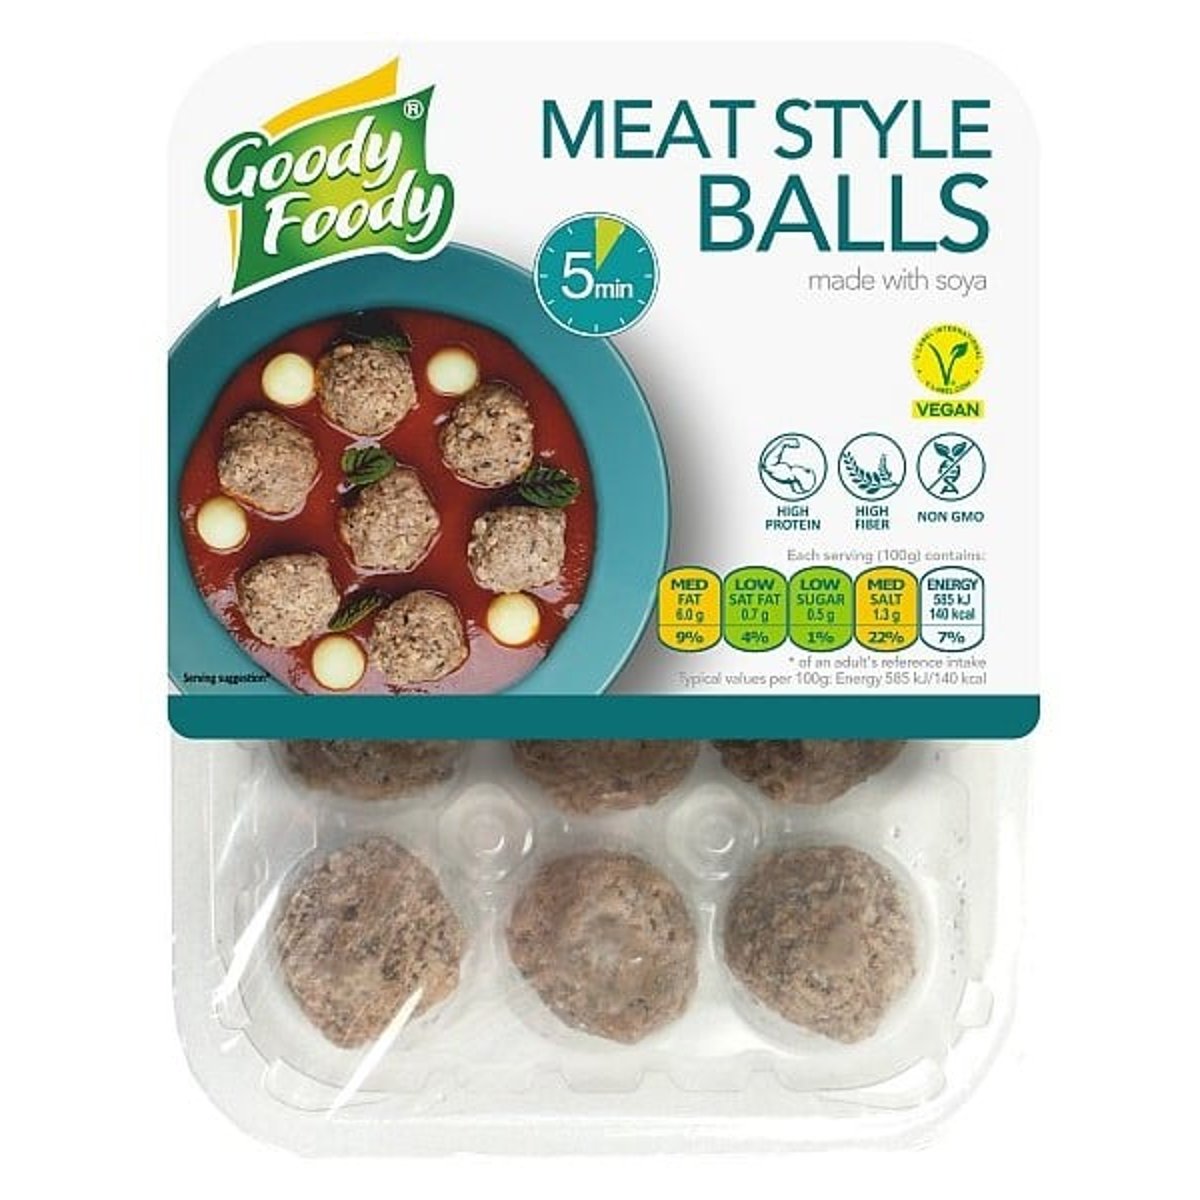 Goody Foody Balls meat style